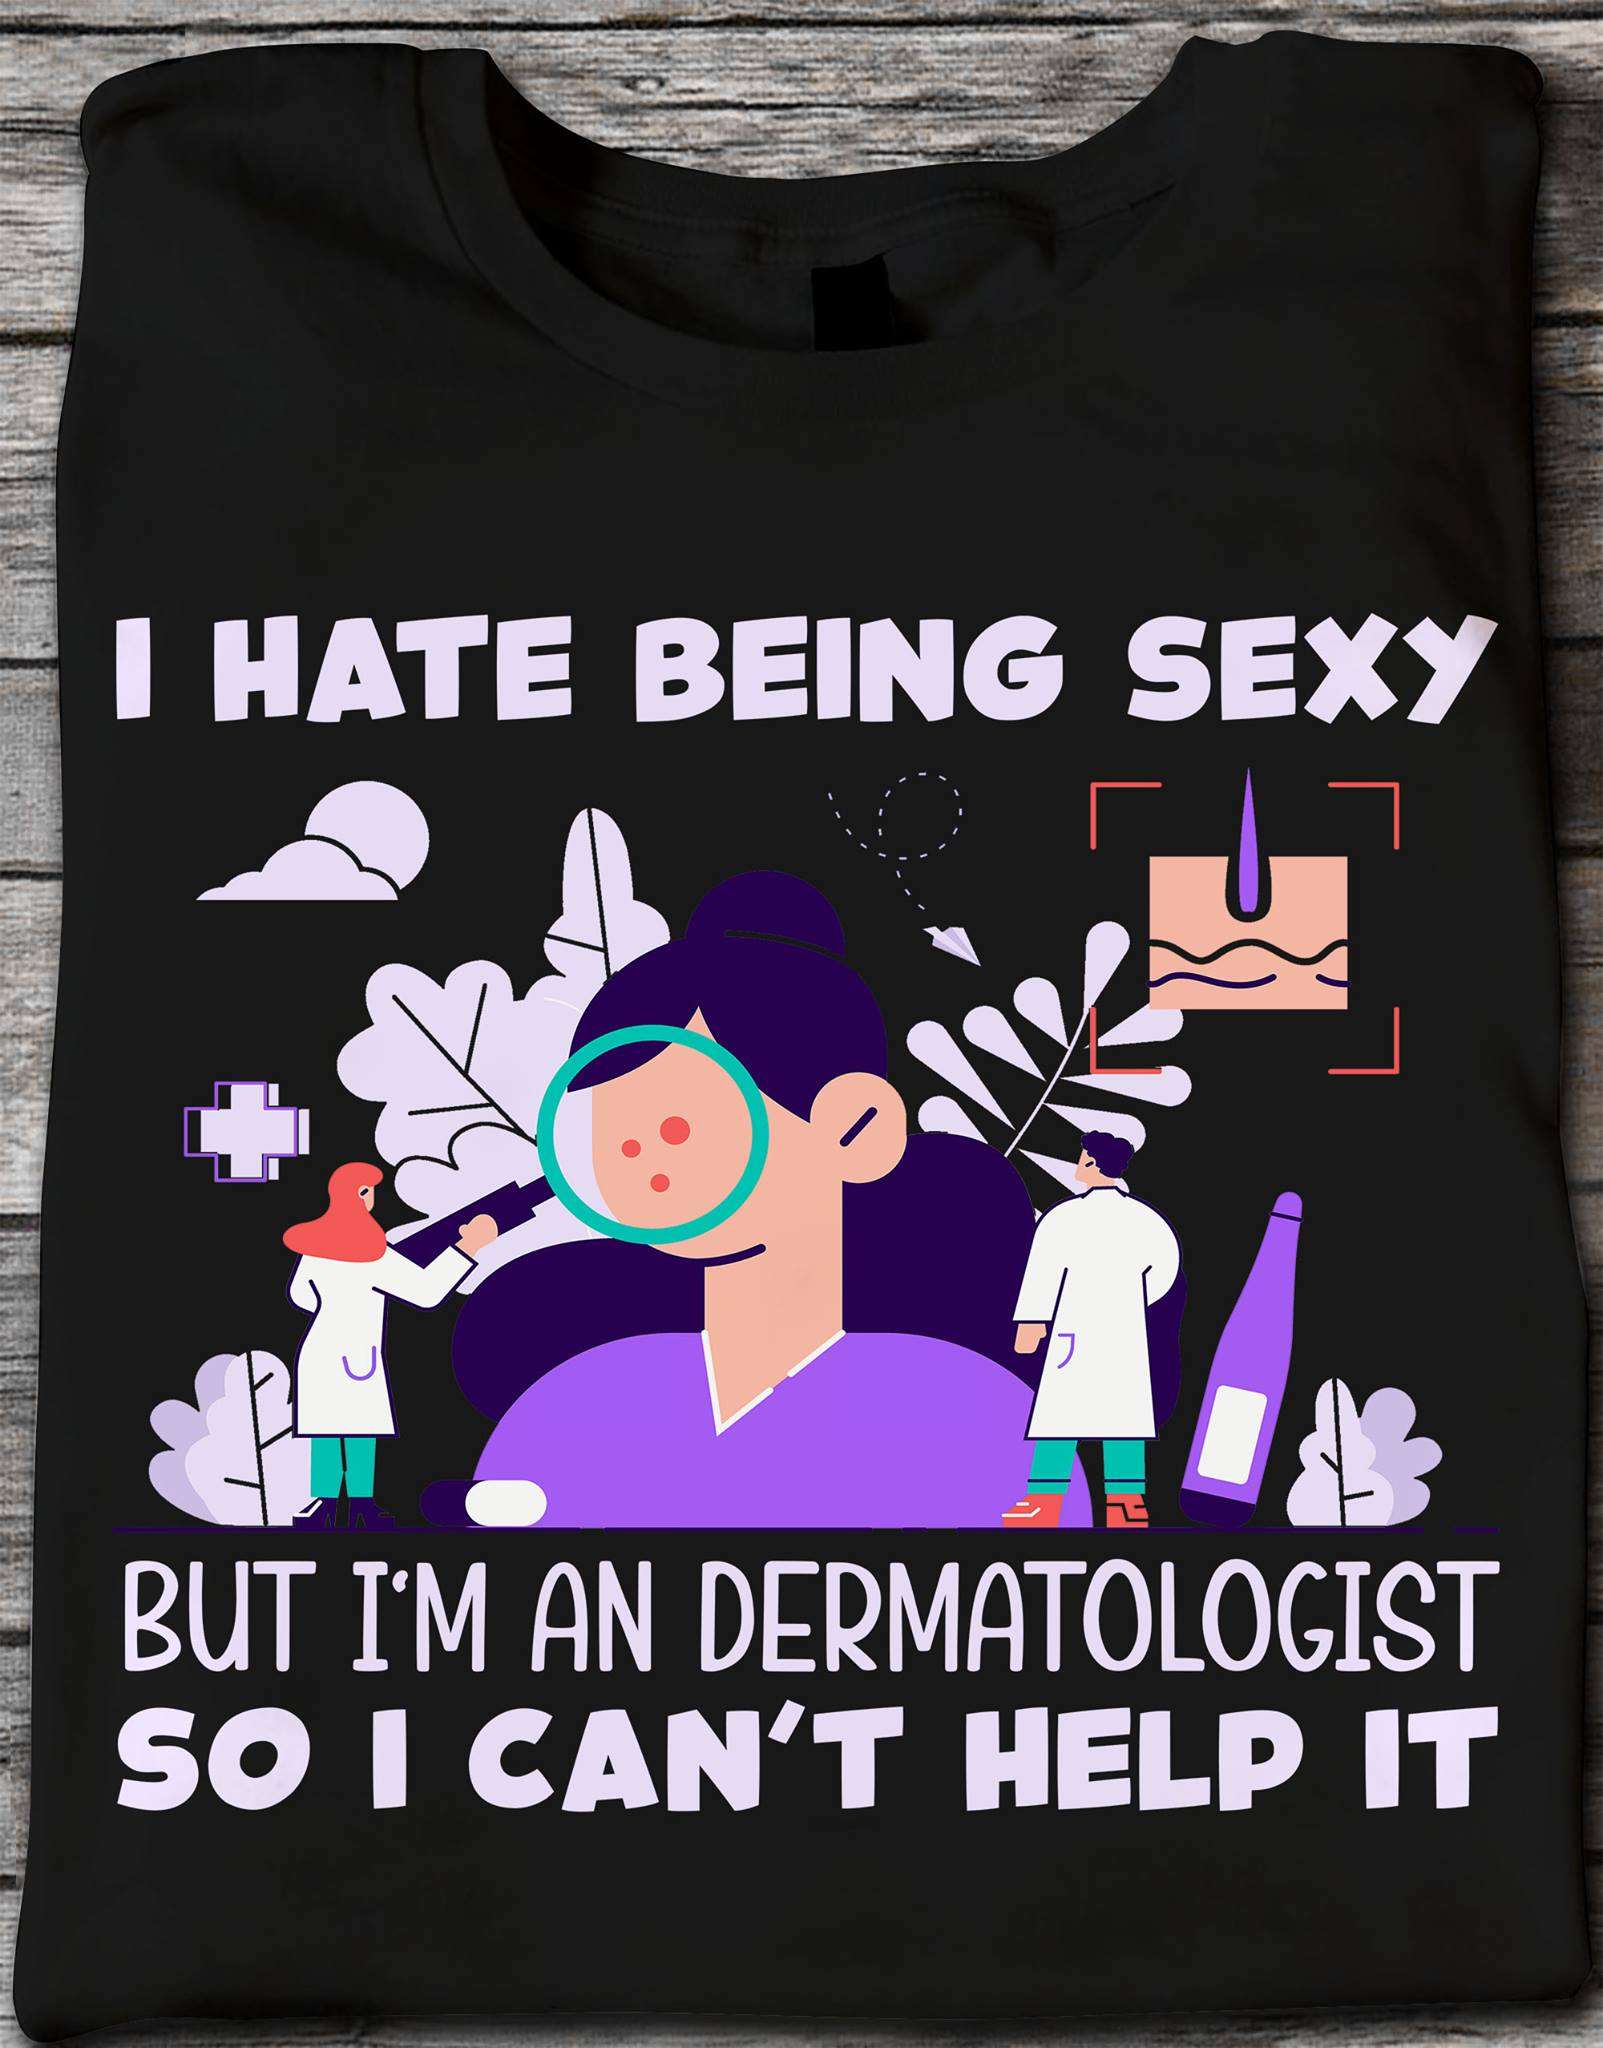 I hate being sexy but I'm an dermatologist so I can't help it - Dermatologist the job, sexy dermatologist